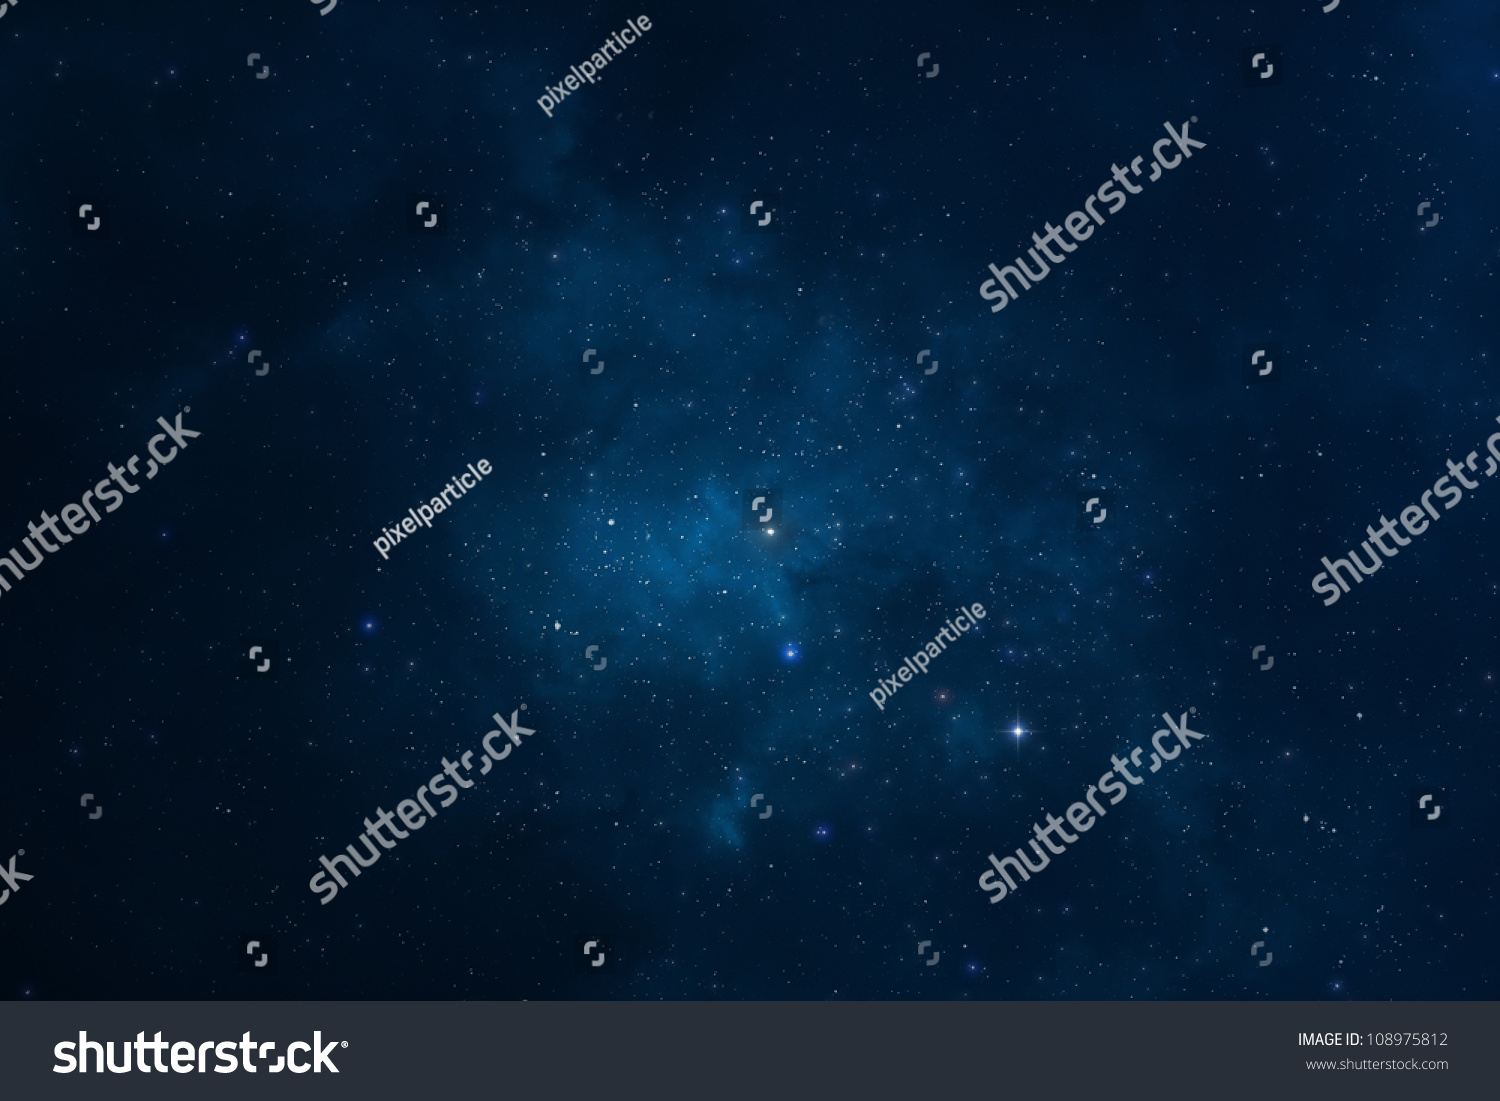 Abstract Background Starry Night Space Universe Stock Illustration ...